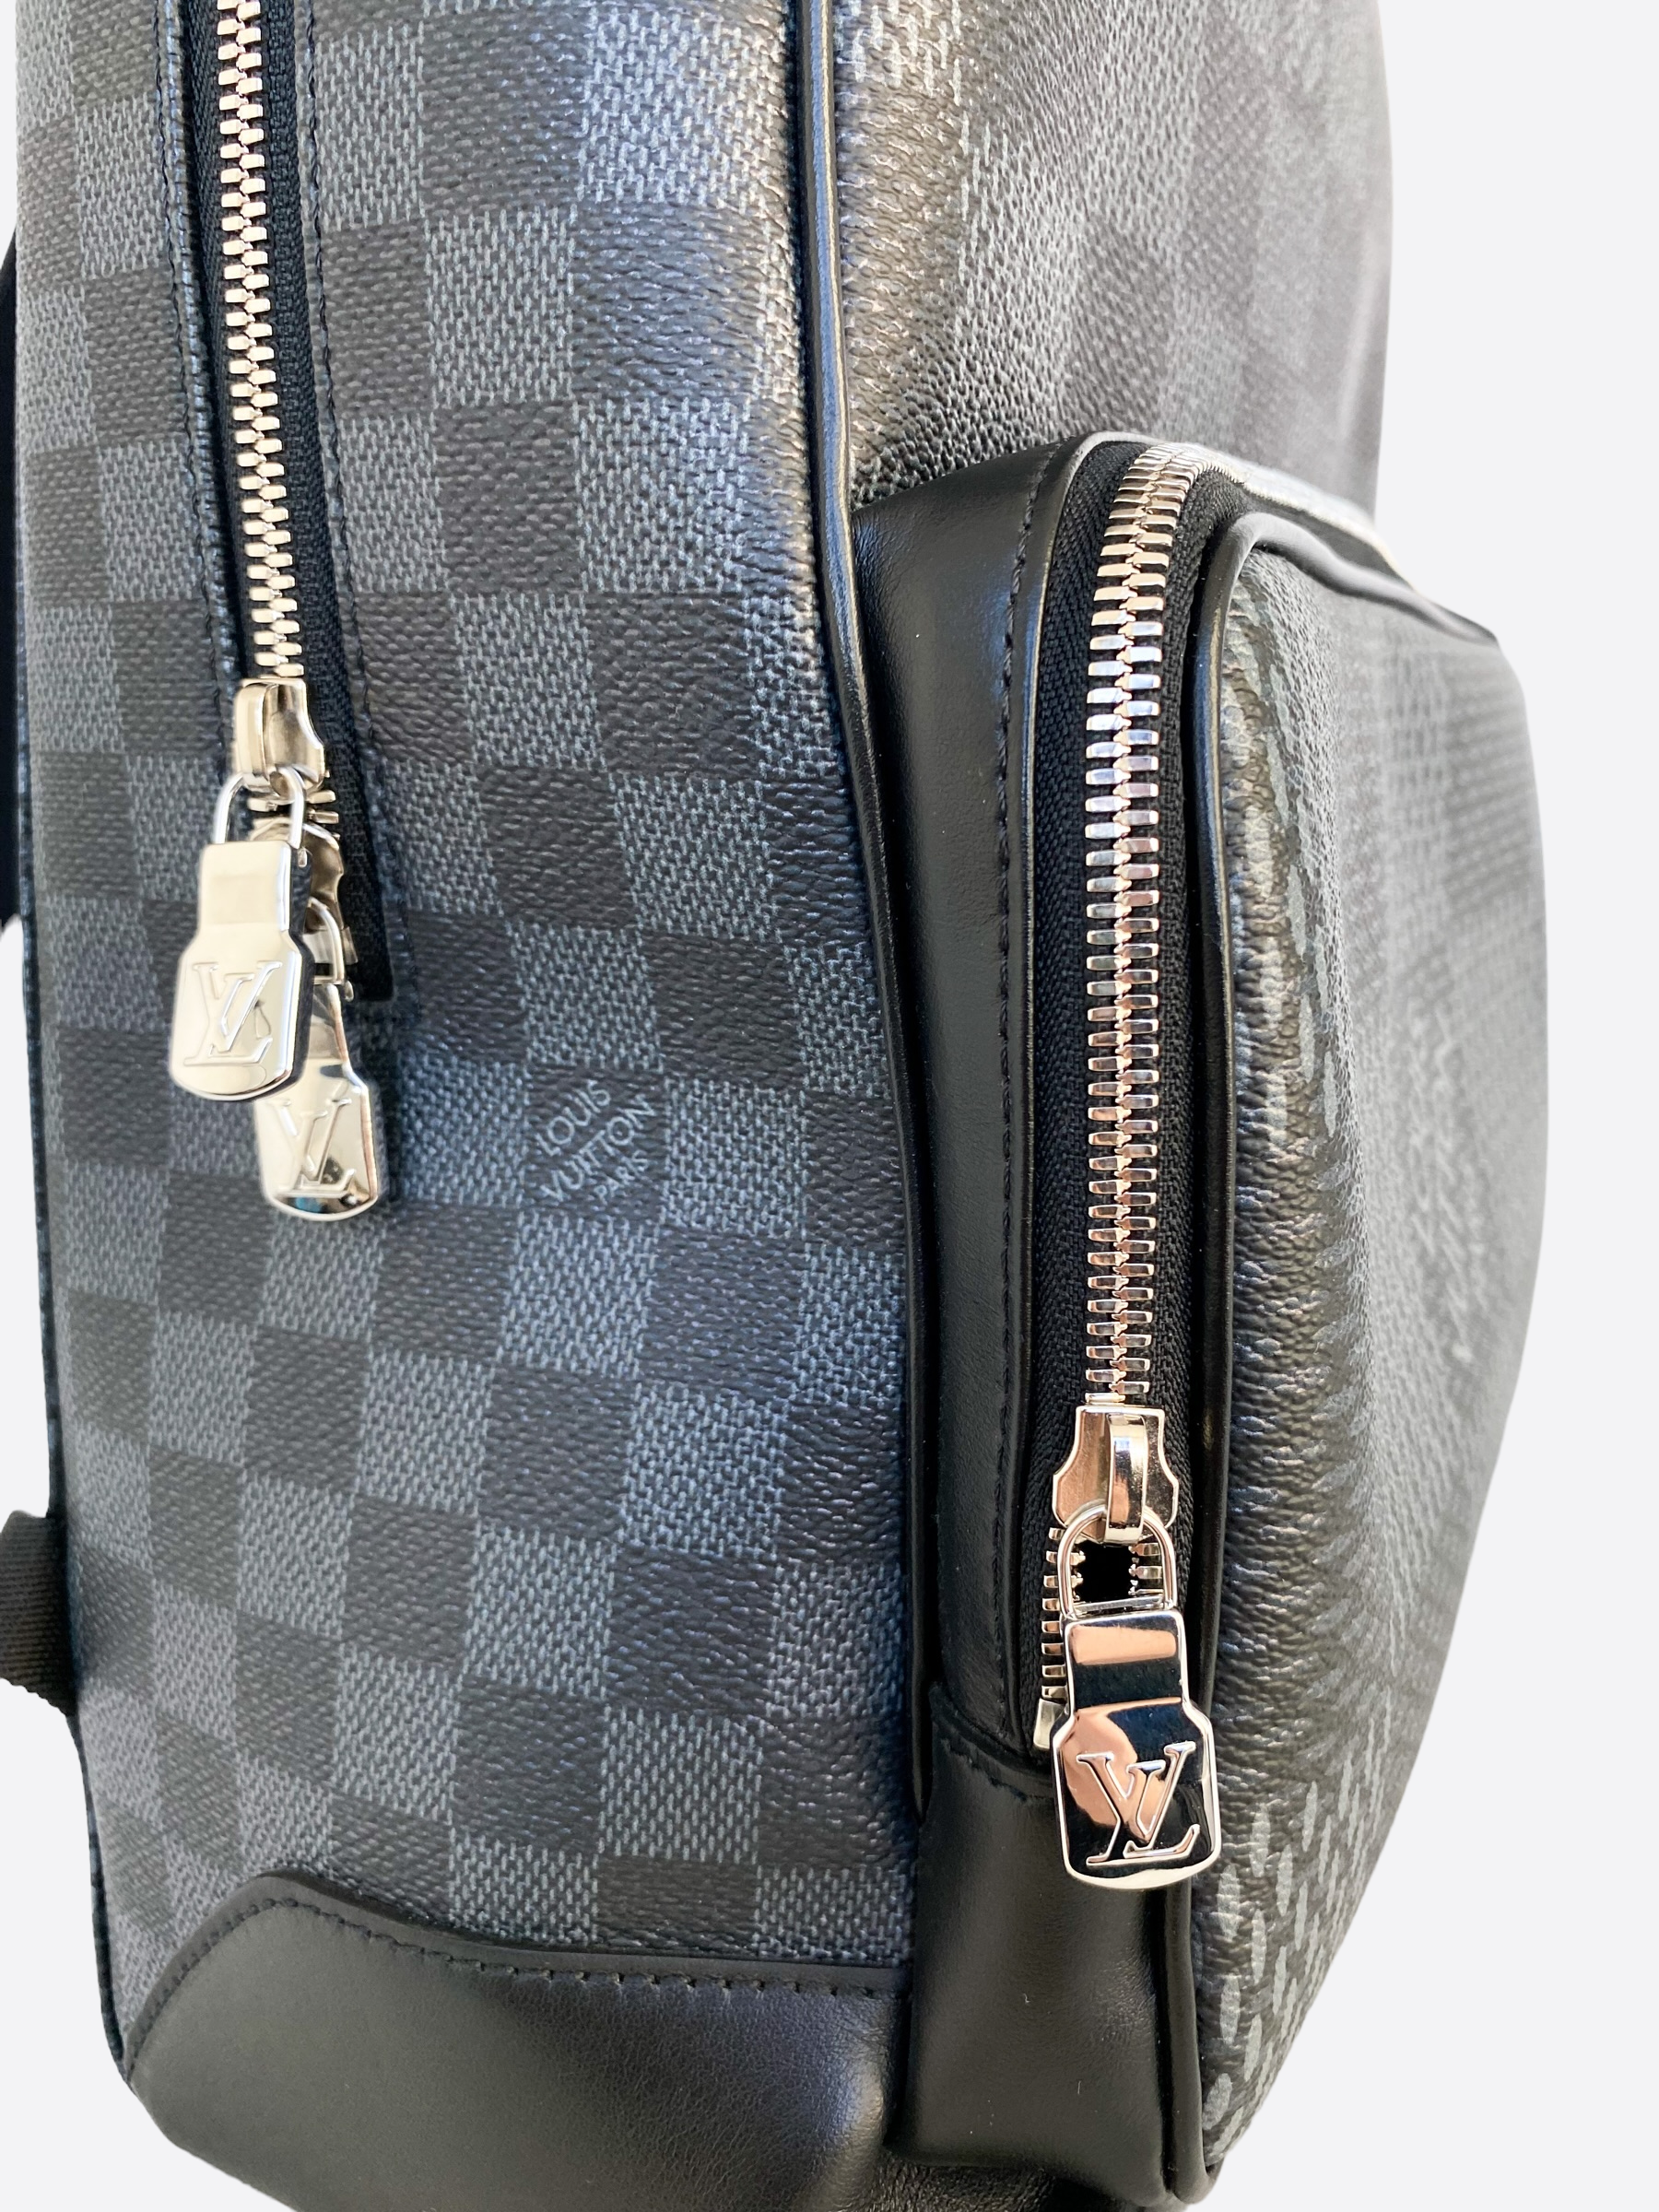 Shop Louis Vuitton 2022-23FW Campus backpack (N50009) by Corriere